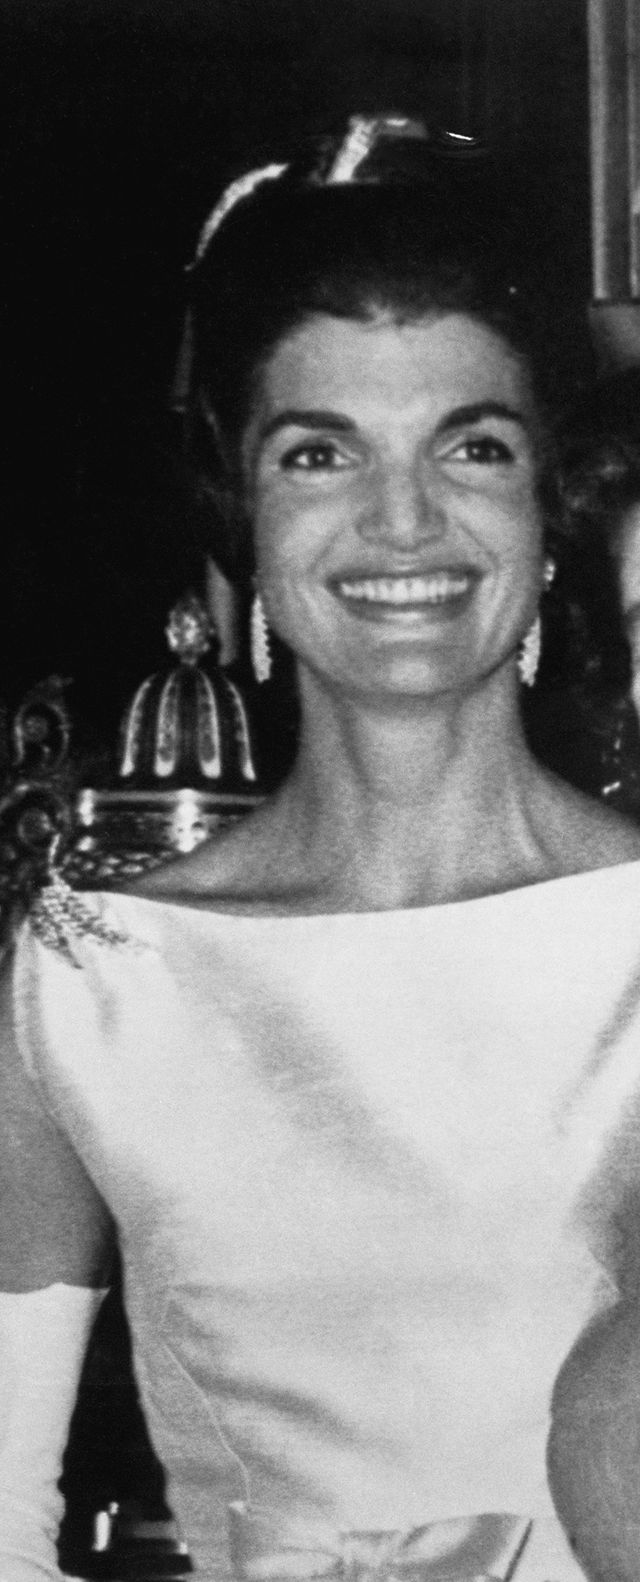 original caption queen elizabeth right flashes a radiant smile as she stands next to mrs jacqueline kennedy after dinner at buckingham palace here june 5th the us president and the first lady were guests of the queen and prince philip this was the first time an american president dined at buckingham palace since 1918